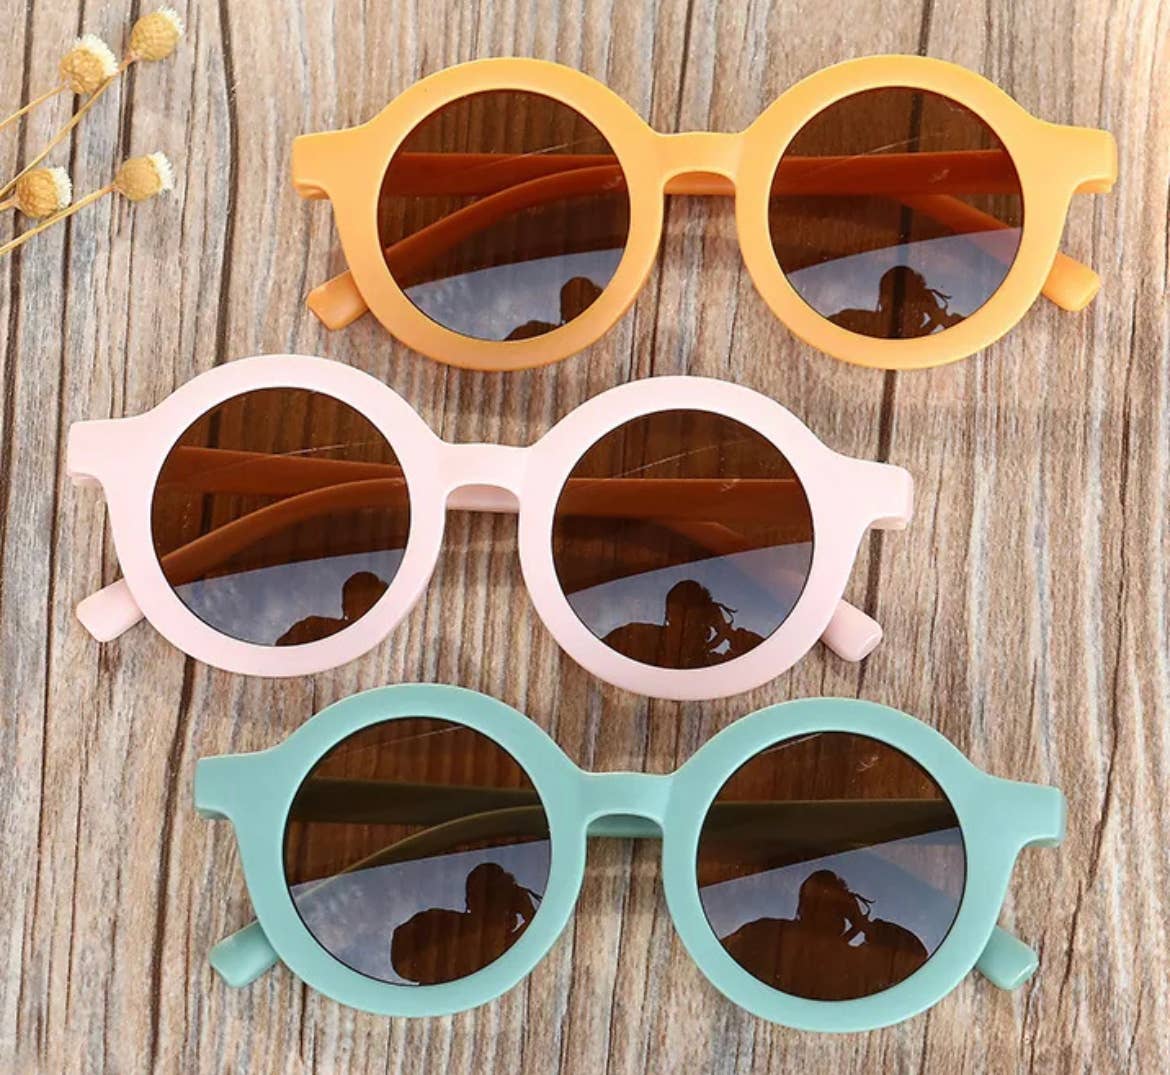 Baby and Toddler Retro Sunnies. Baby Sunglasses